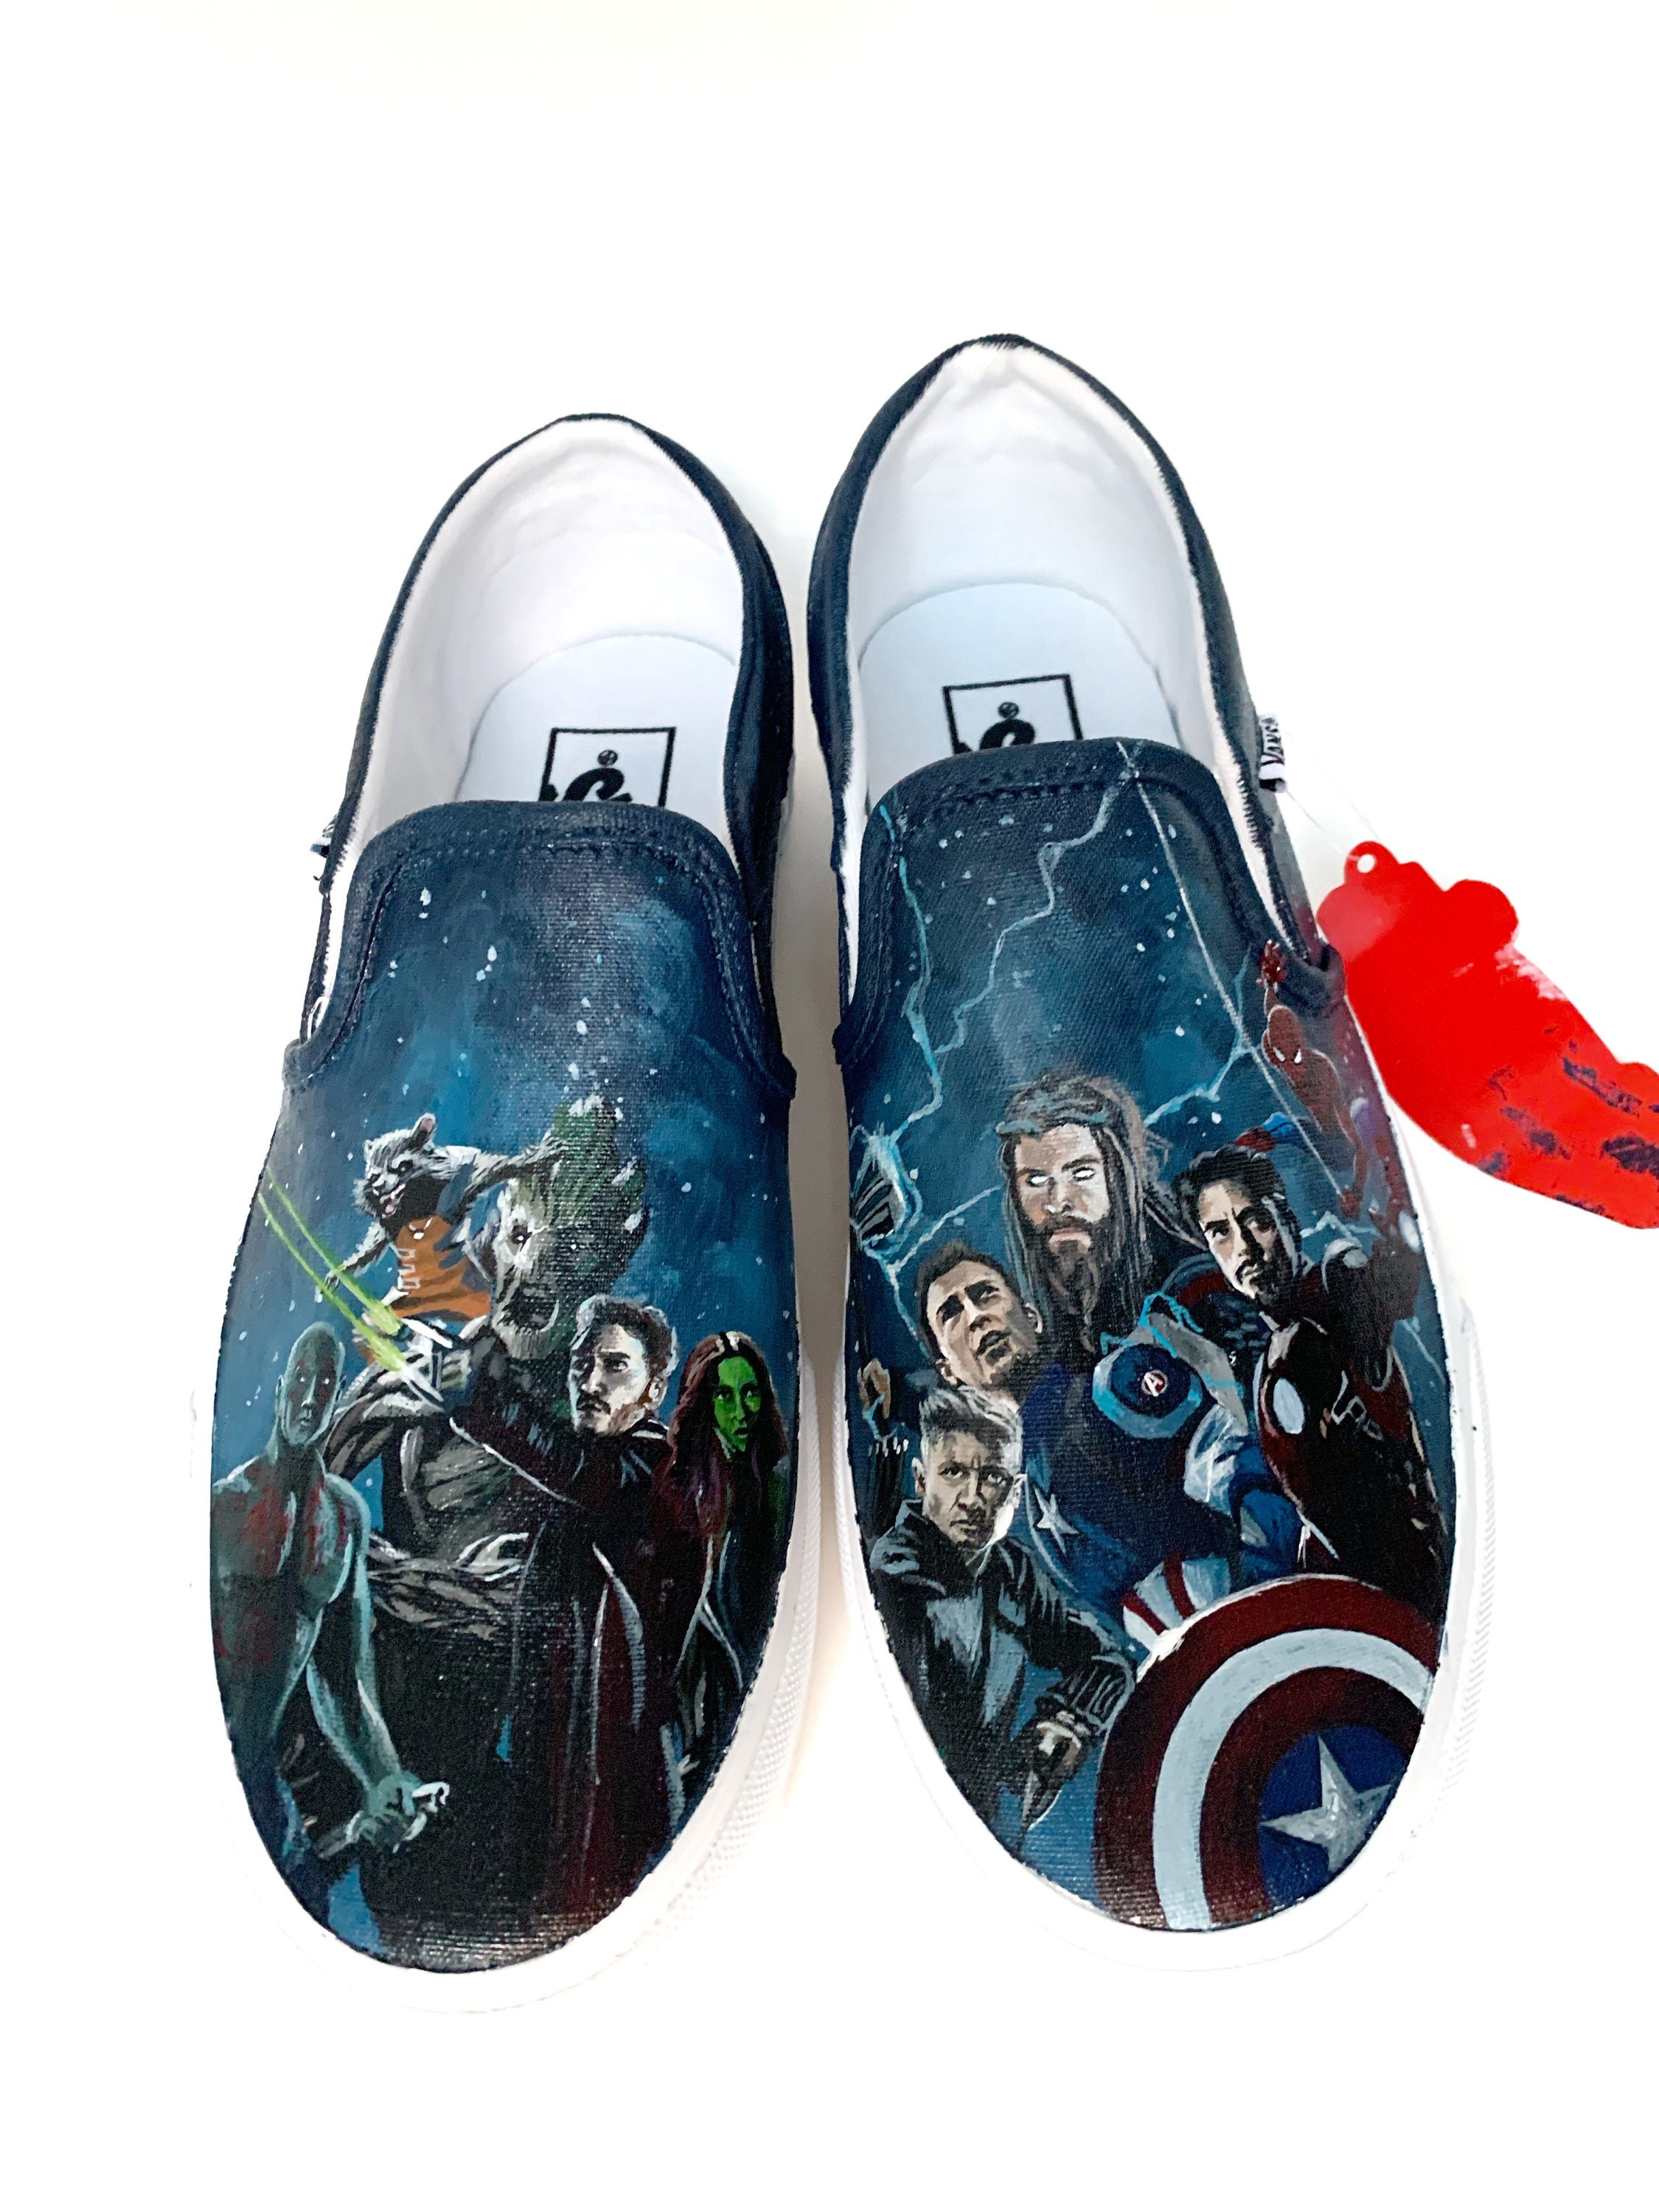 Avengers and the Galaxy - Etsy